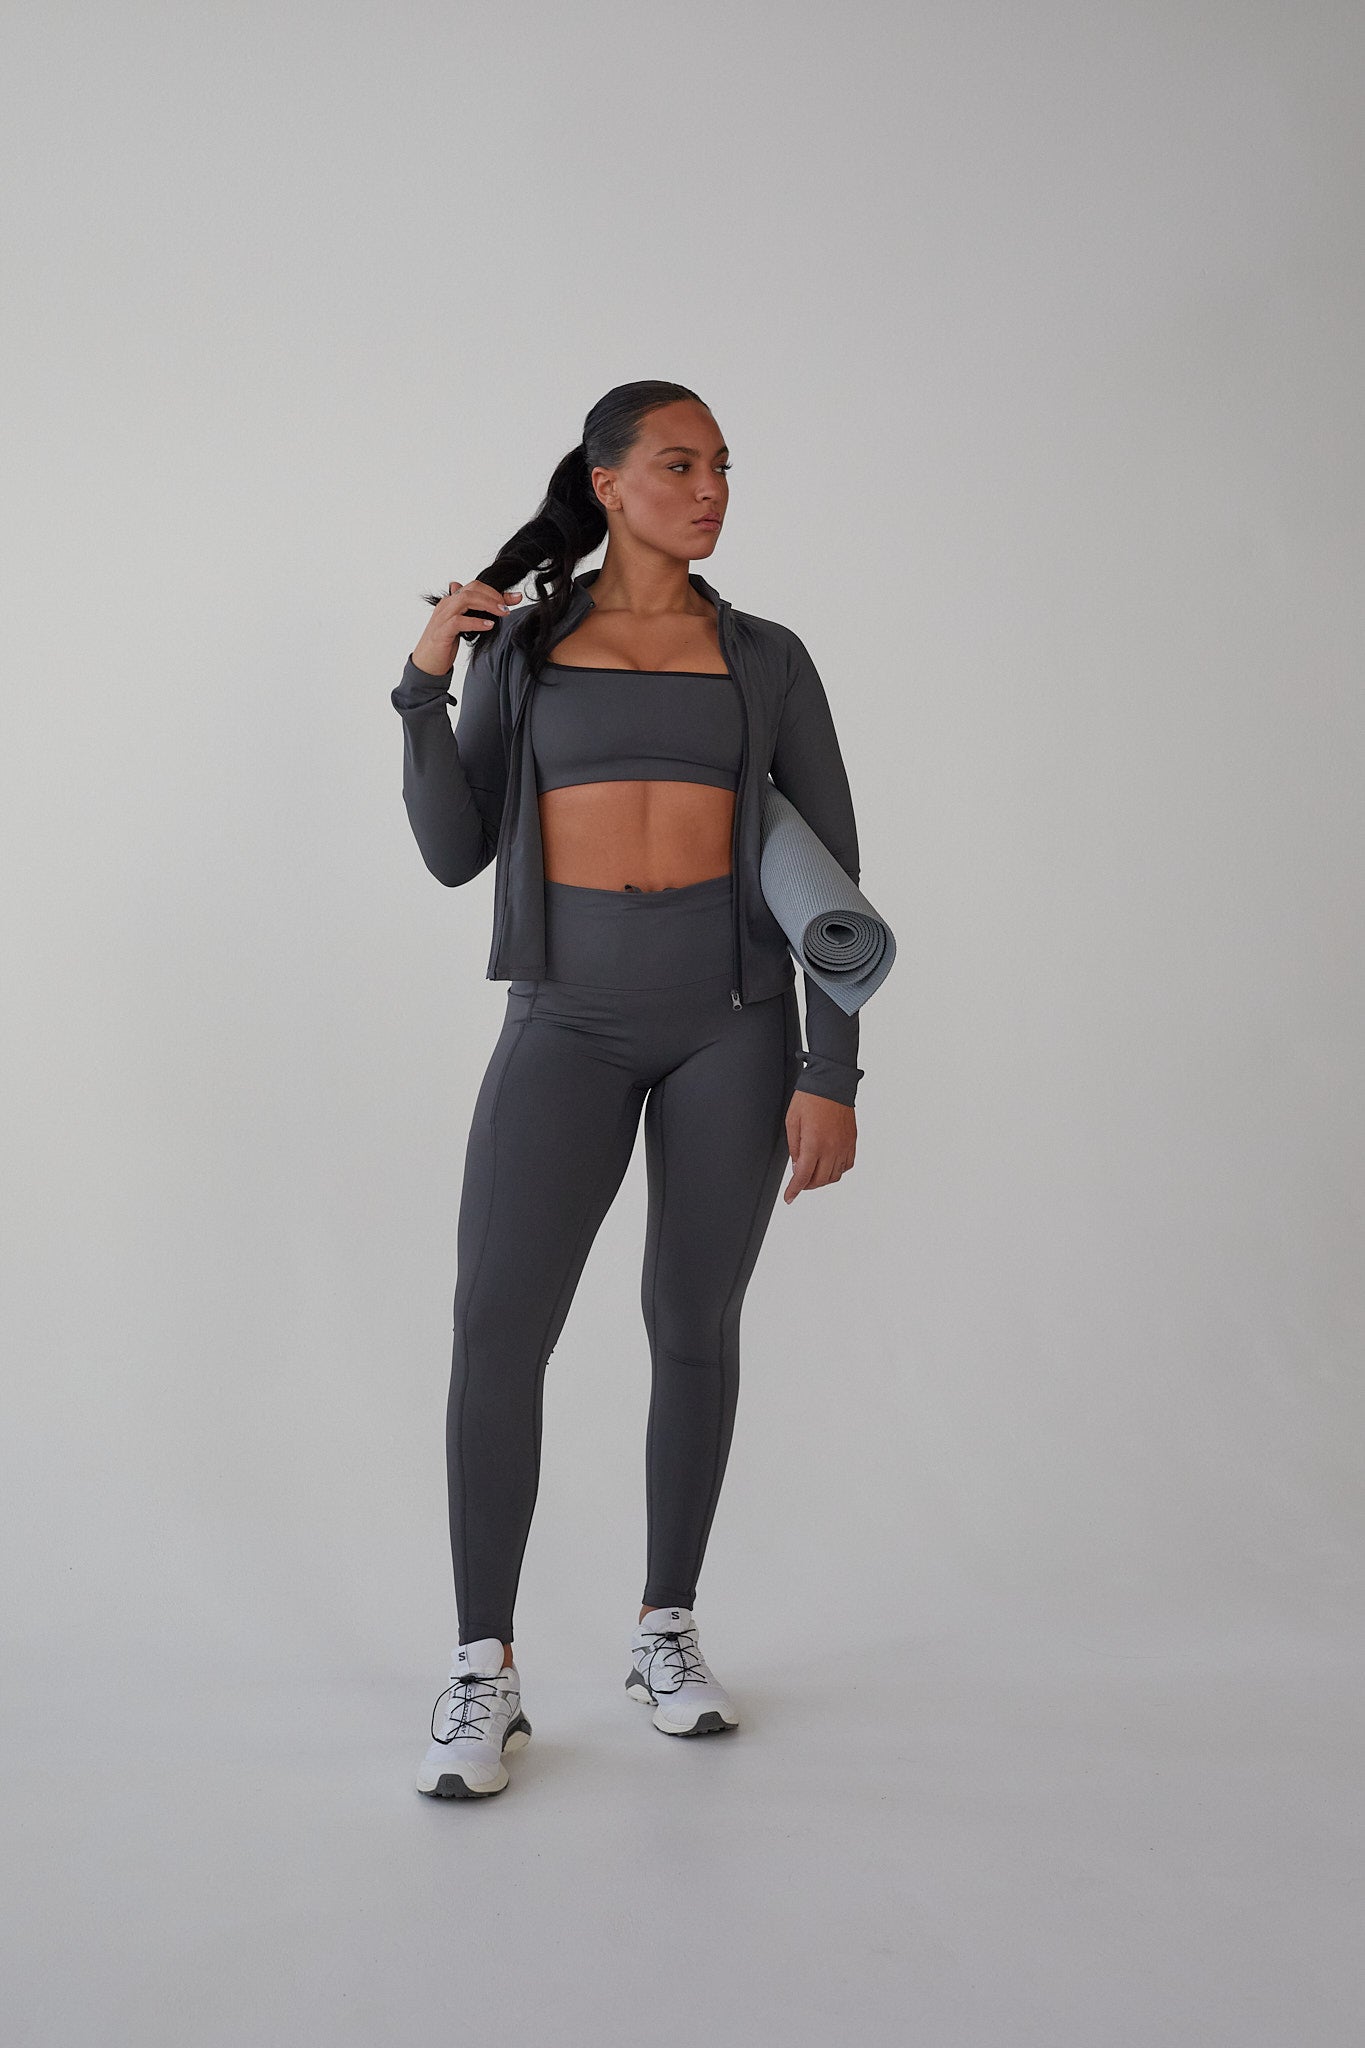 Exercere  Exclusive training clothes for women by women